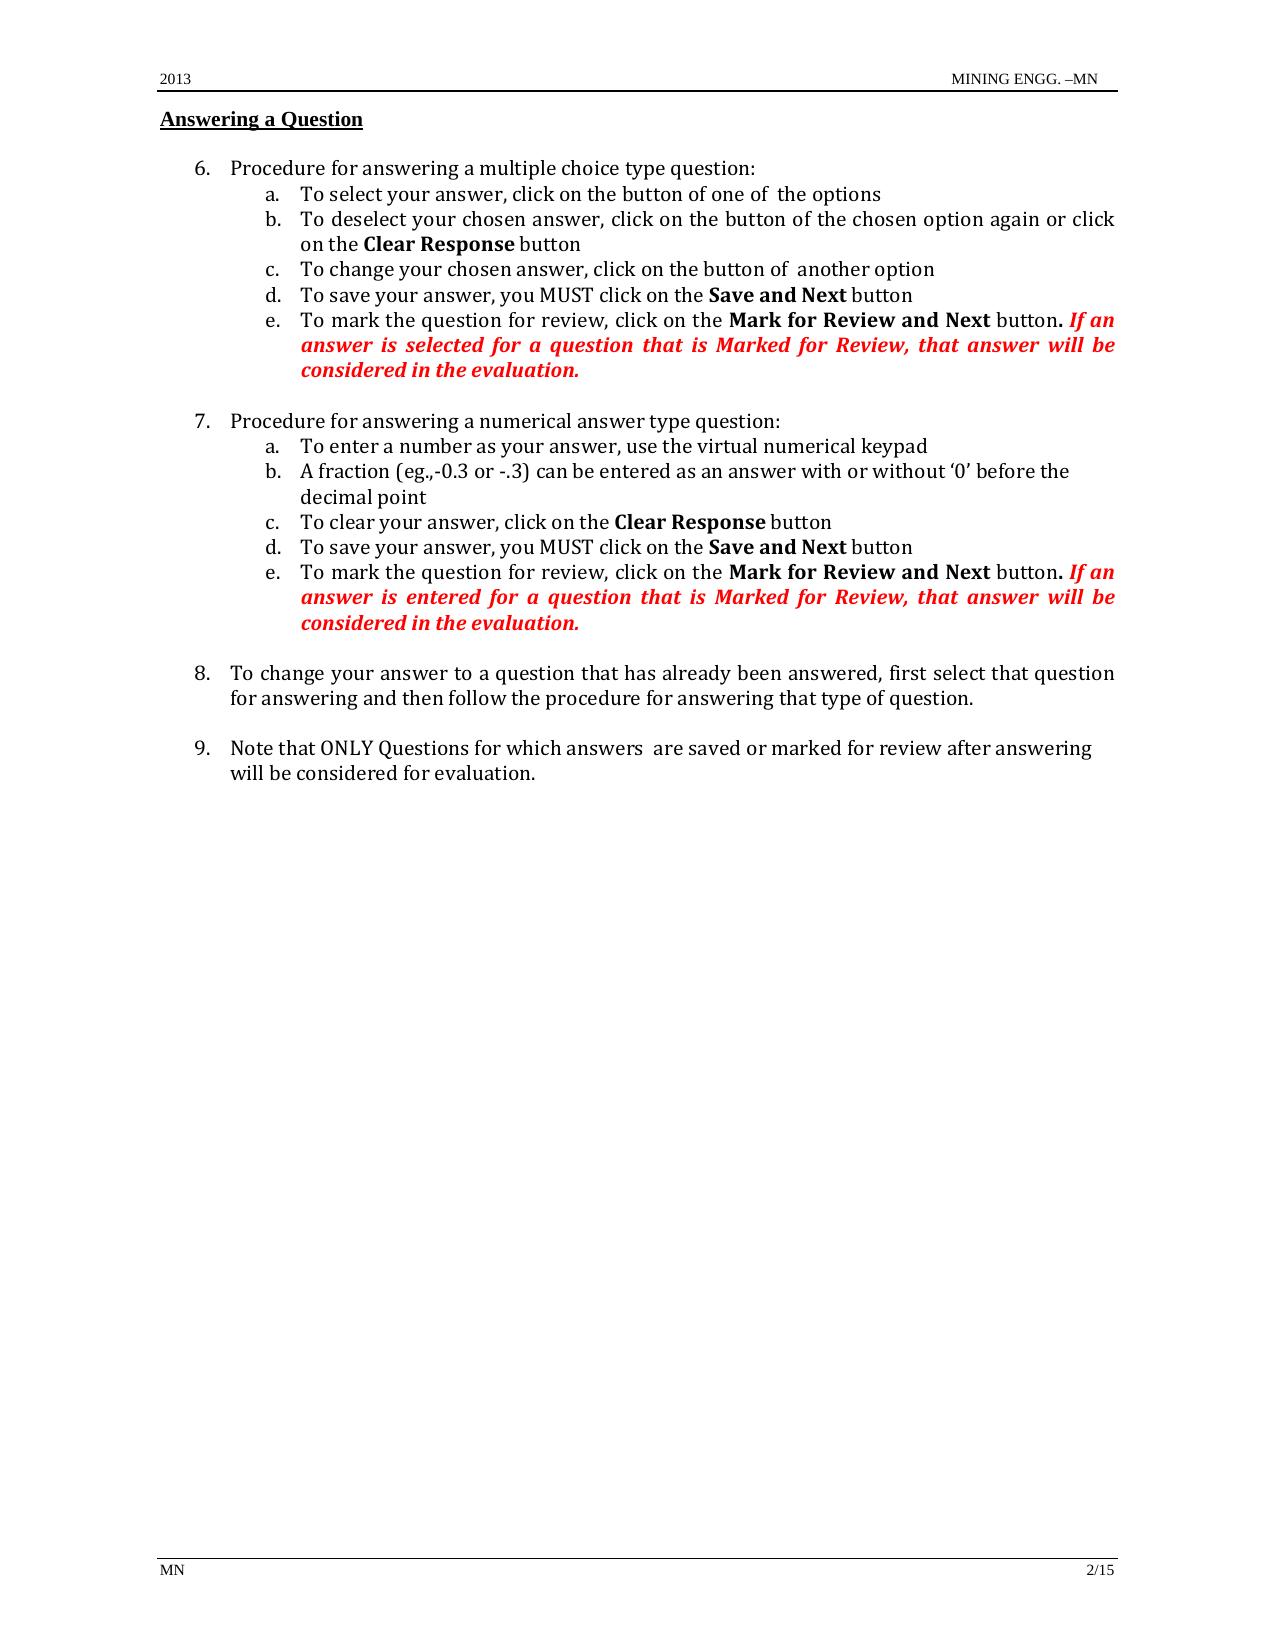 GATE 2013 Mining Engineering (MN) Question Paper with Answer Key - Page 2